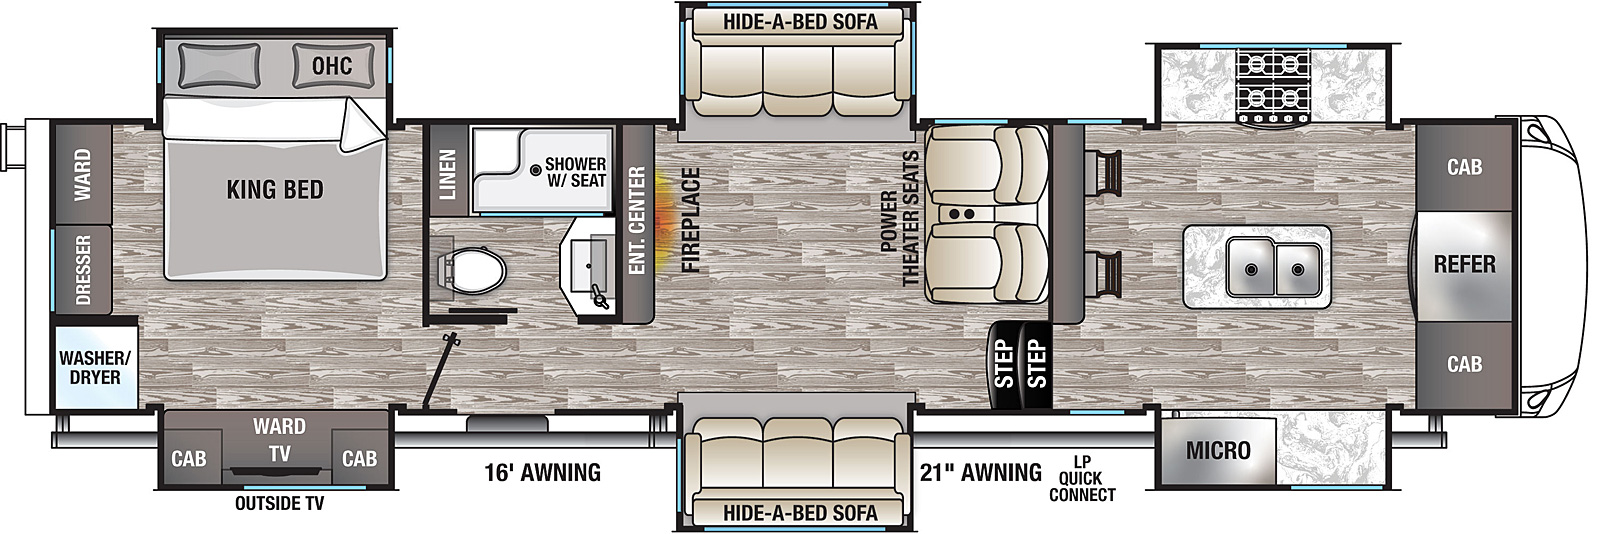 The 38EFK-DSO has 6 slide outs with 3 on each side and 2 entry door. Exterior features include an outside TV, two awnings with one being 16 foot and the other 21 foot, and an LP quick connect. Interior layout from front to back includes: front kitchen in the upper deck with refrigerator and cabinets along the front wall, off-door side slide out holding stovetop and counter space, off-door side slide out holding microwave and counter space, kitchen island with double basin sink, and rear facing bar with barstools; living area with opposing side slide outs each holding a hide-a bed sofa; rear facing entertainment center with fireplace; off-door side side aisle bathroom with shower w/seat, toilet, linen storage, sink and overhead cabinets; rear bedroom with king bed in off-door side slide out; door side slide out across from bed with cabinets, TV and wardrobes; rear wall includes washer/dryer, dresser and wardrobe.